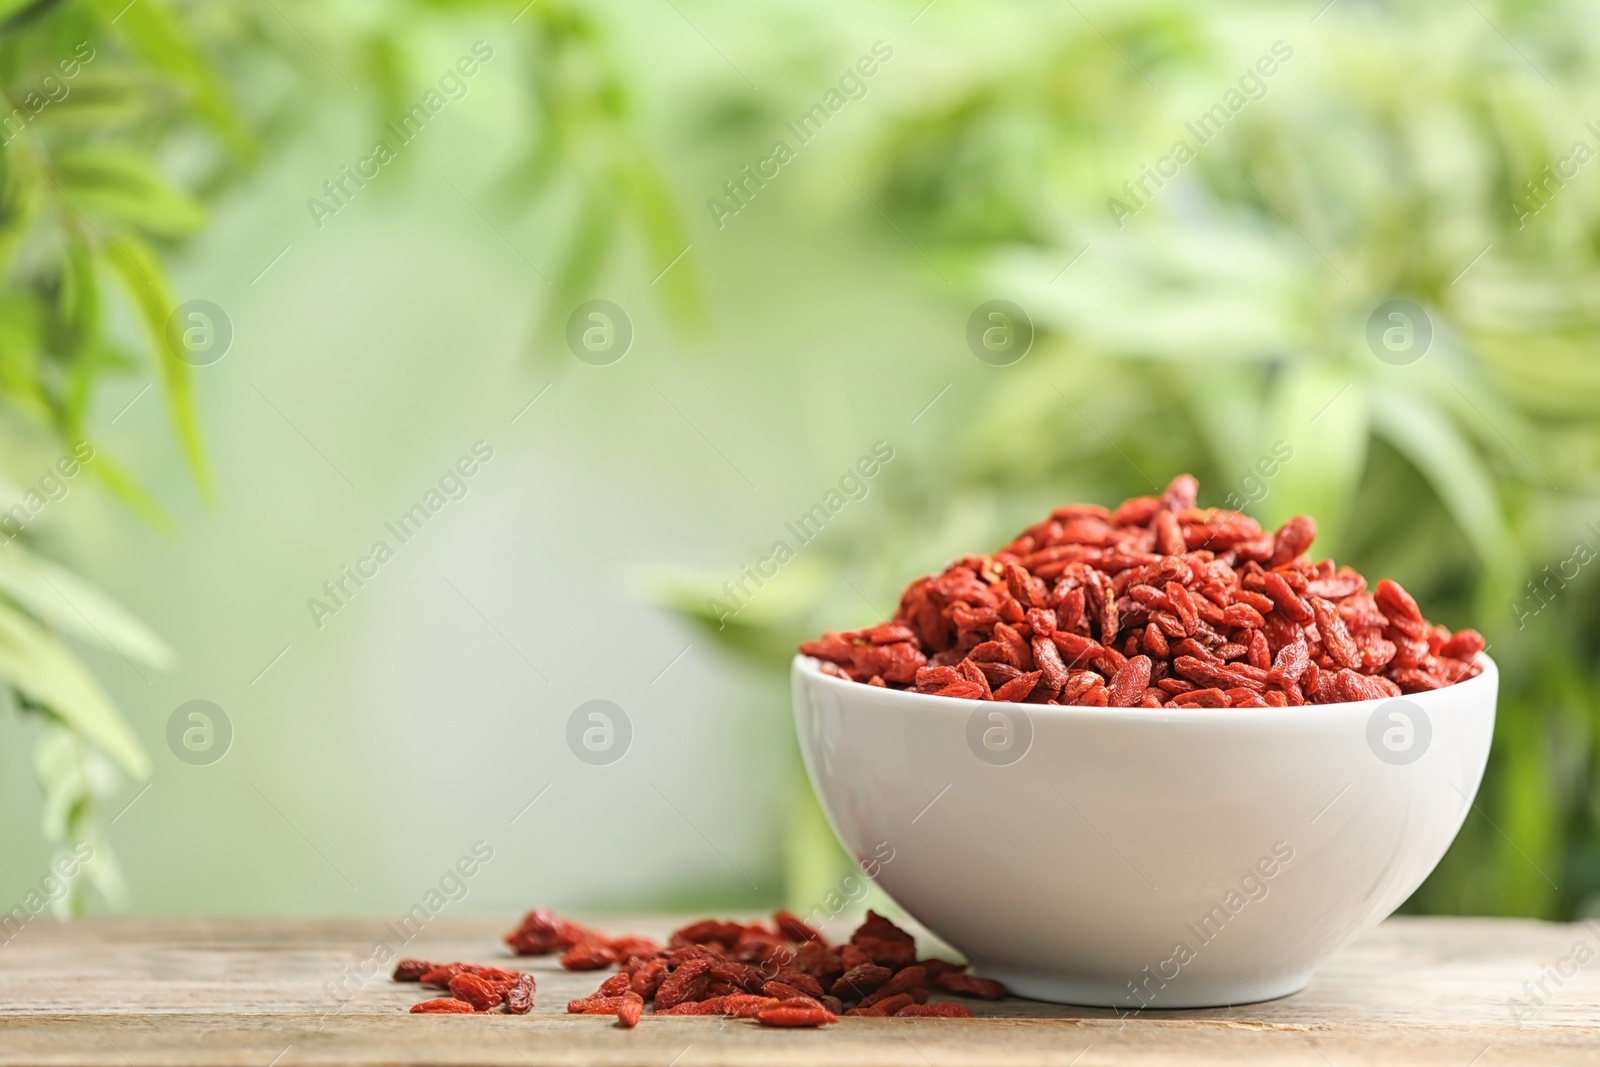 Photo of Bowl of dried goji berries on table against blurred background. Space for text